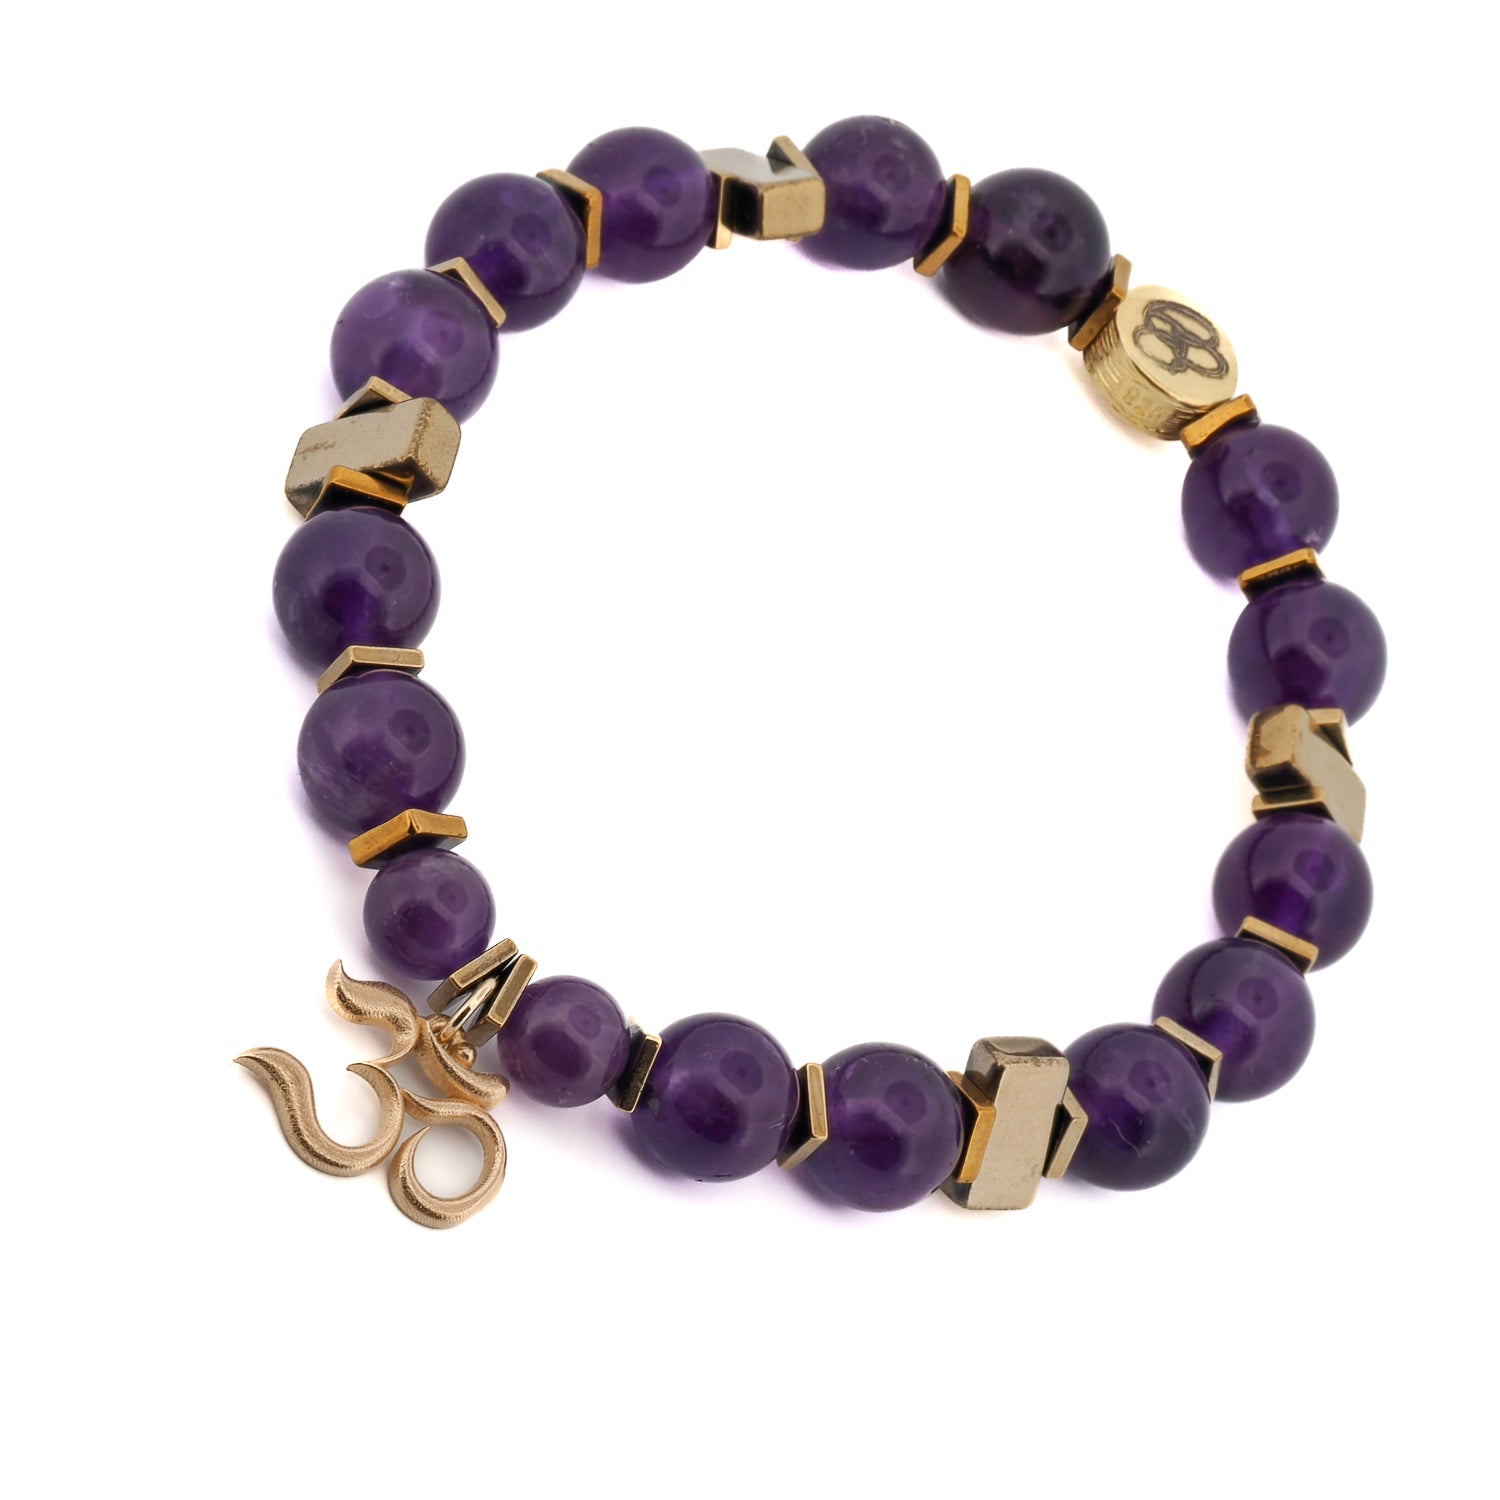 Bracelet with a stone of relax and harmony (Amethyst)